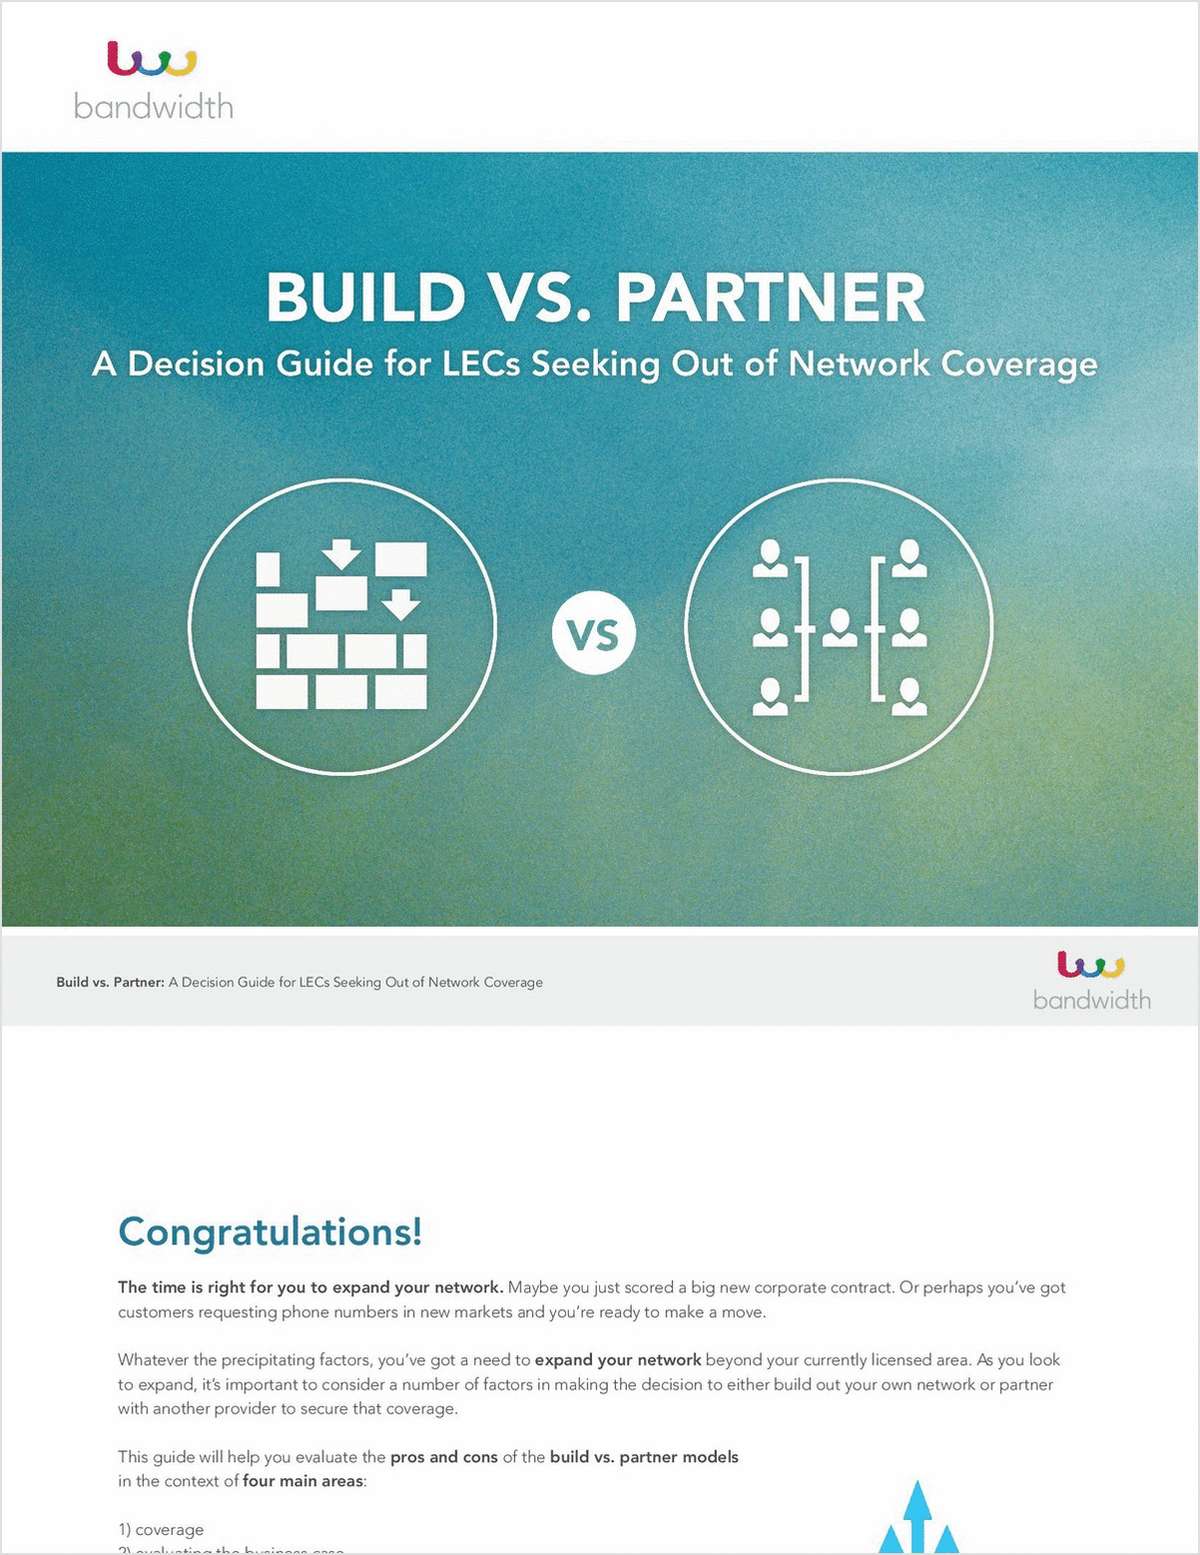 Build Vs. Partner: A Decision Guide for LECs Seeking Out of Network Coverage